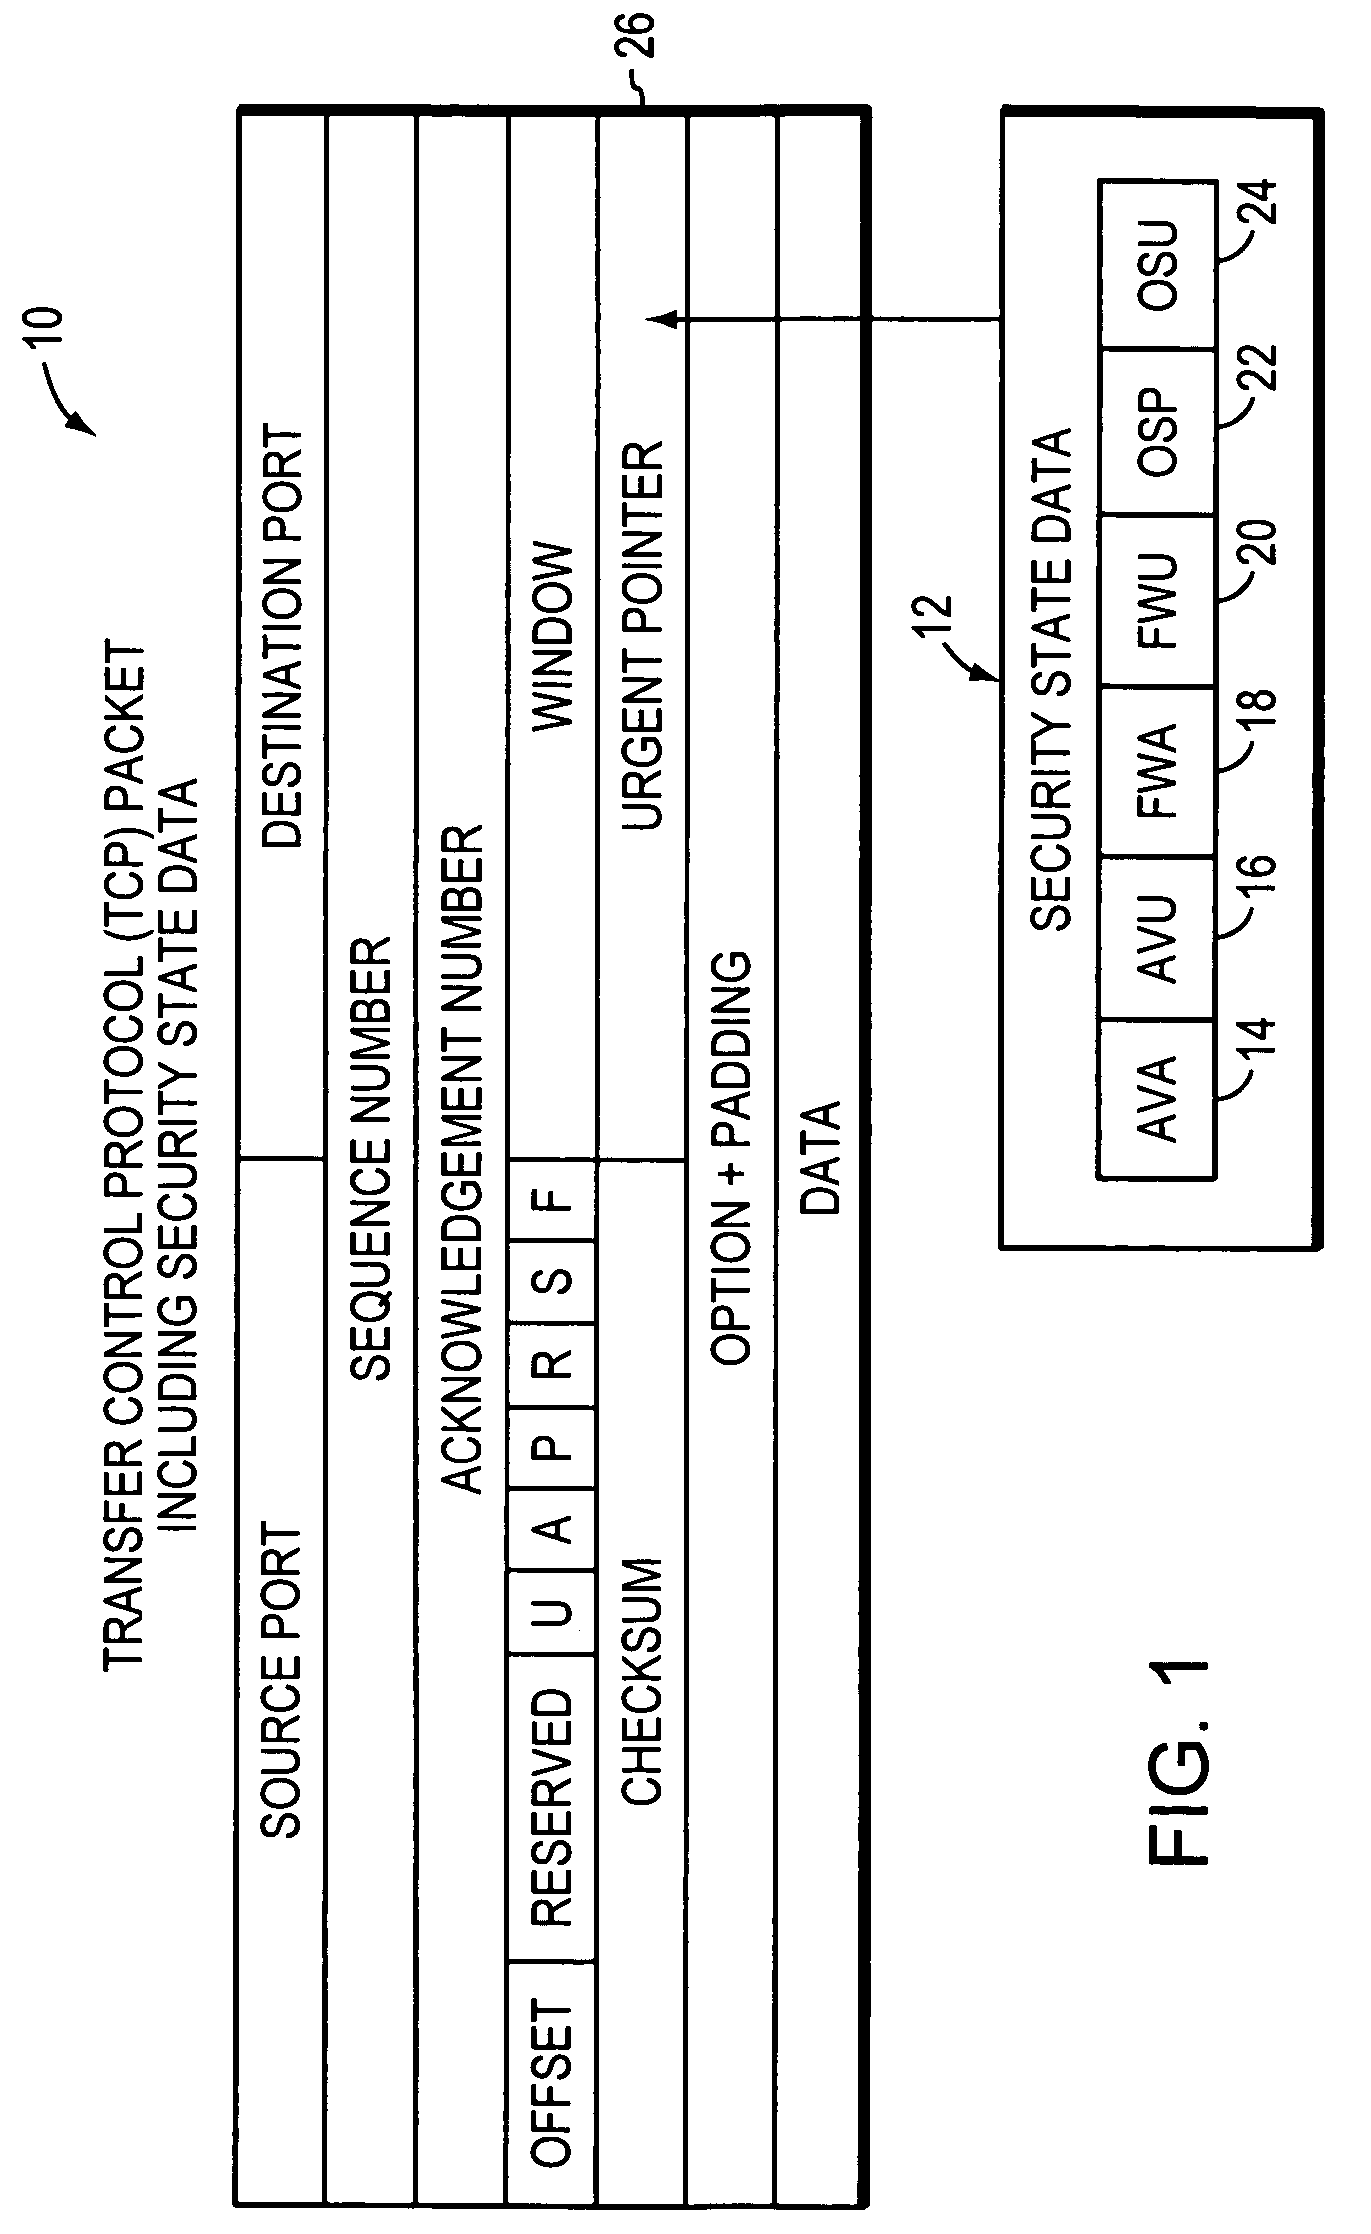 System, apparatuses, methods and computer-readable media for determining the security status of a computer before establishing a network connection